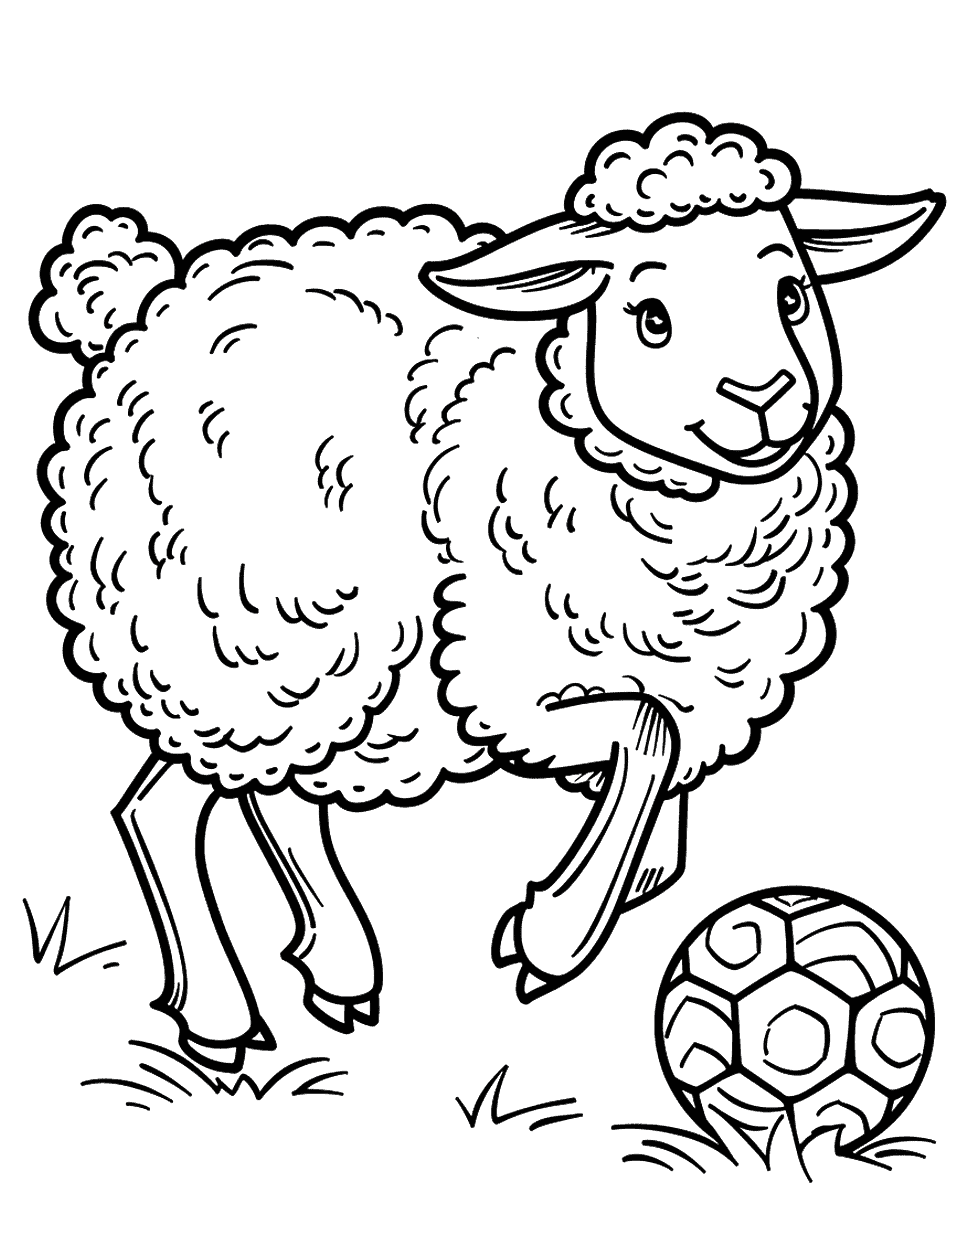 Sheep Playing Soccer Coloring Page - A sheep kicking a soccer ball, action captured in a dynamic pose.